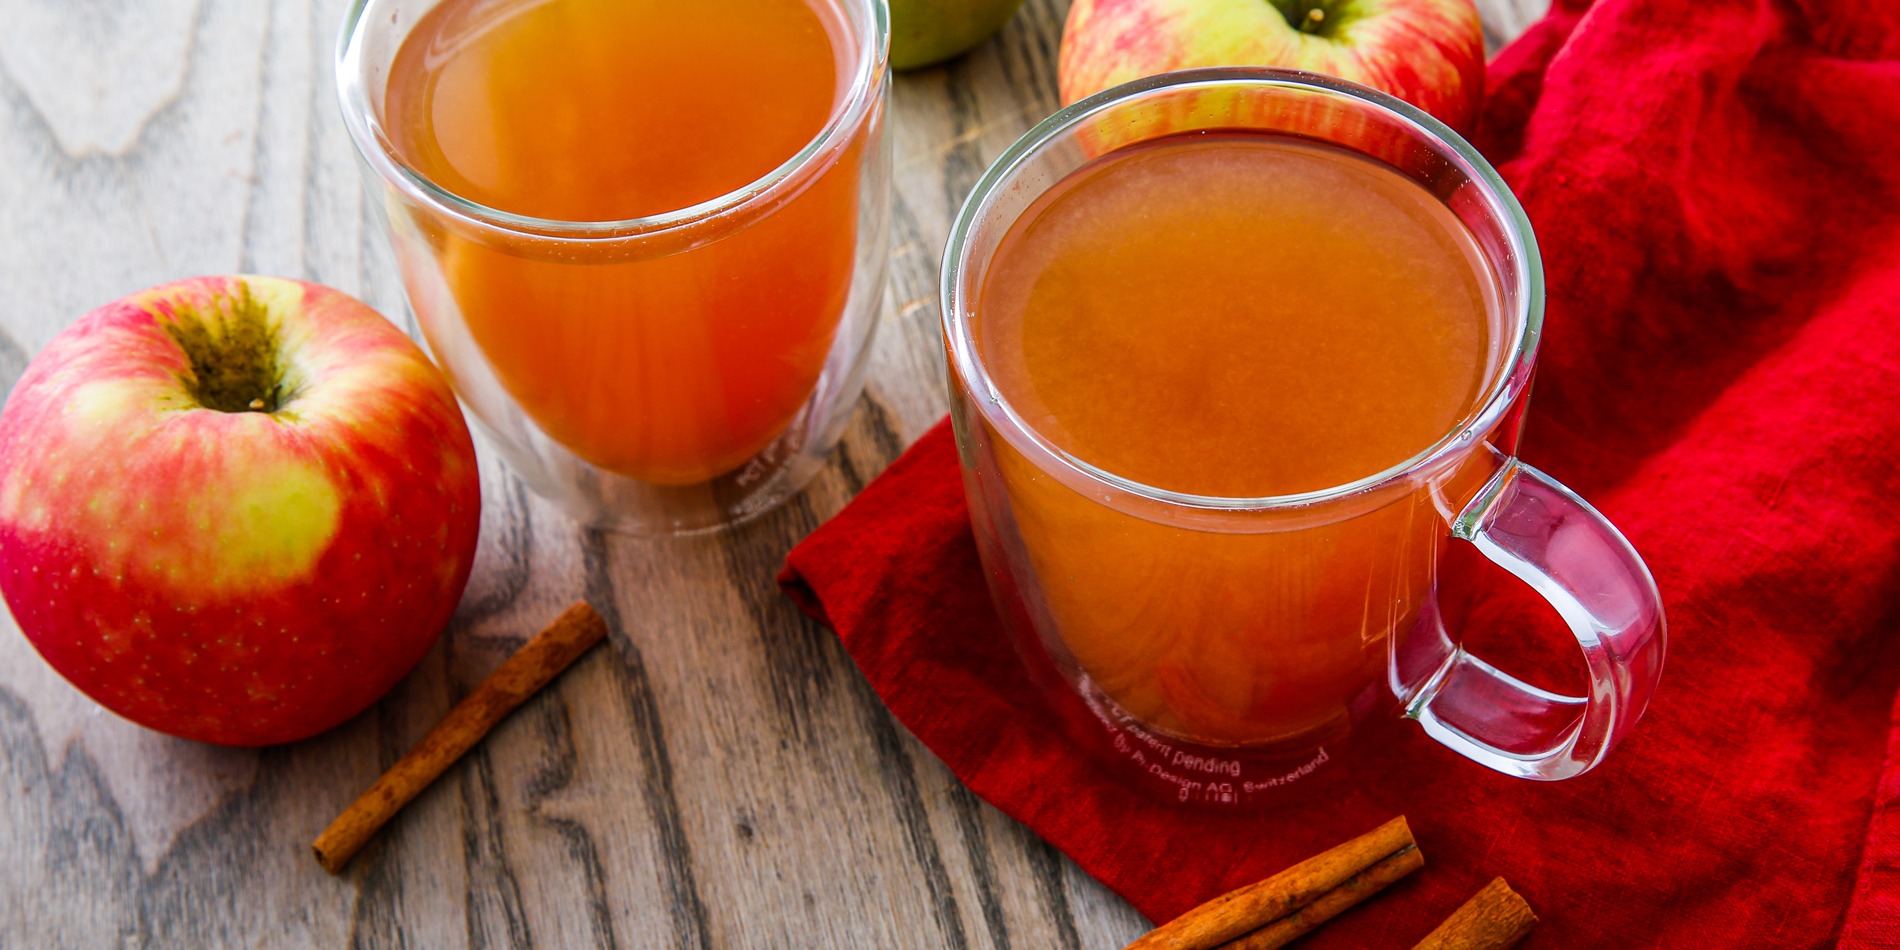 Sip and Savor: How to Make Apple Tea at Home